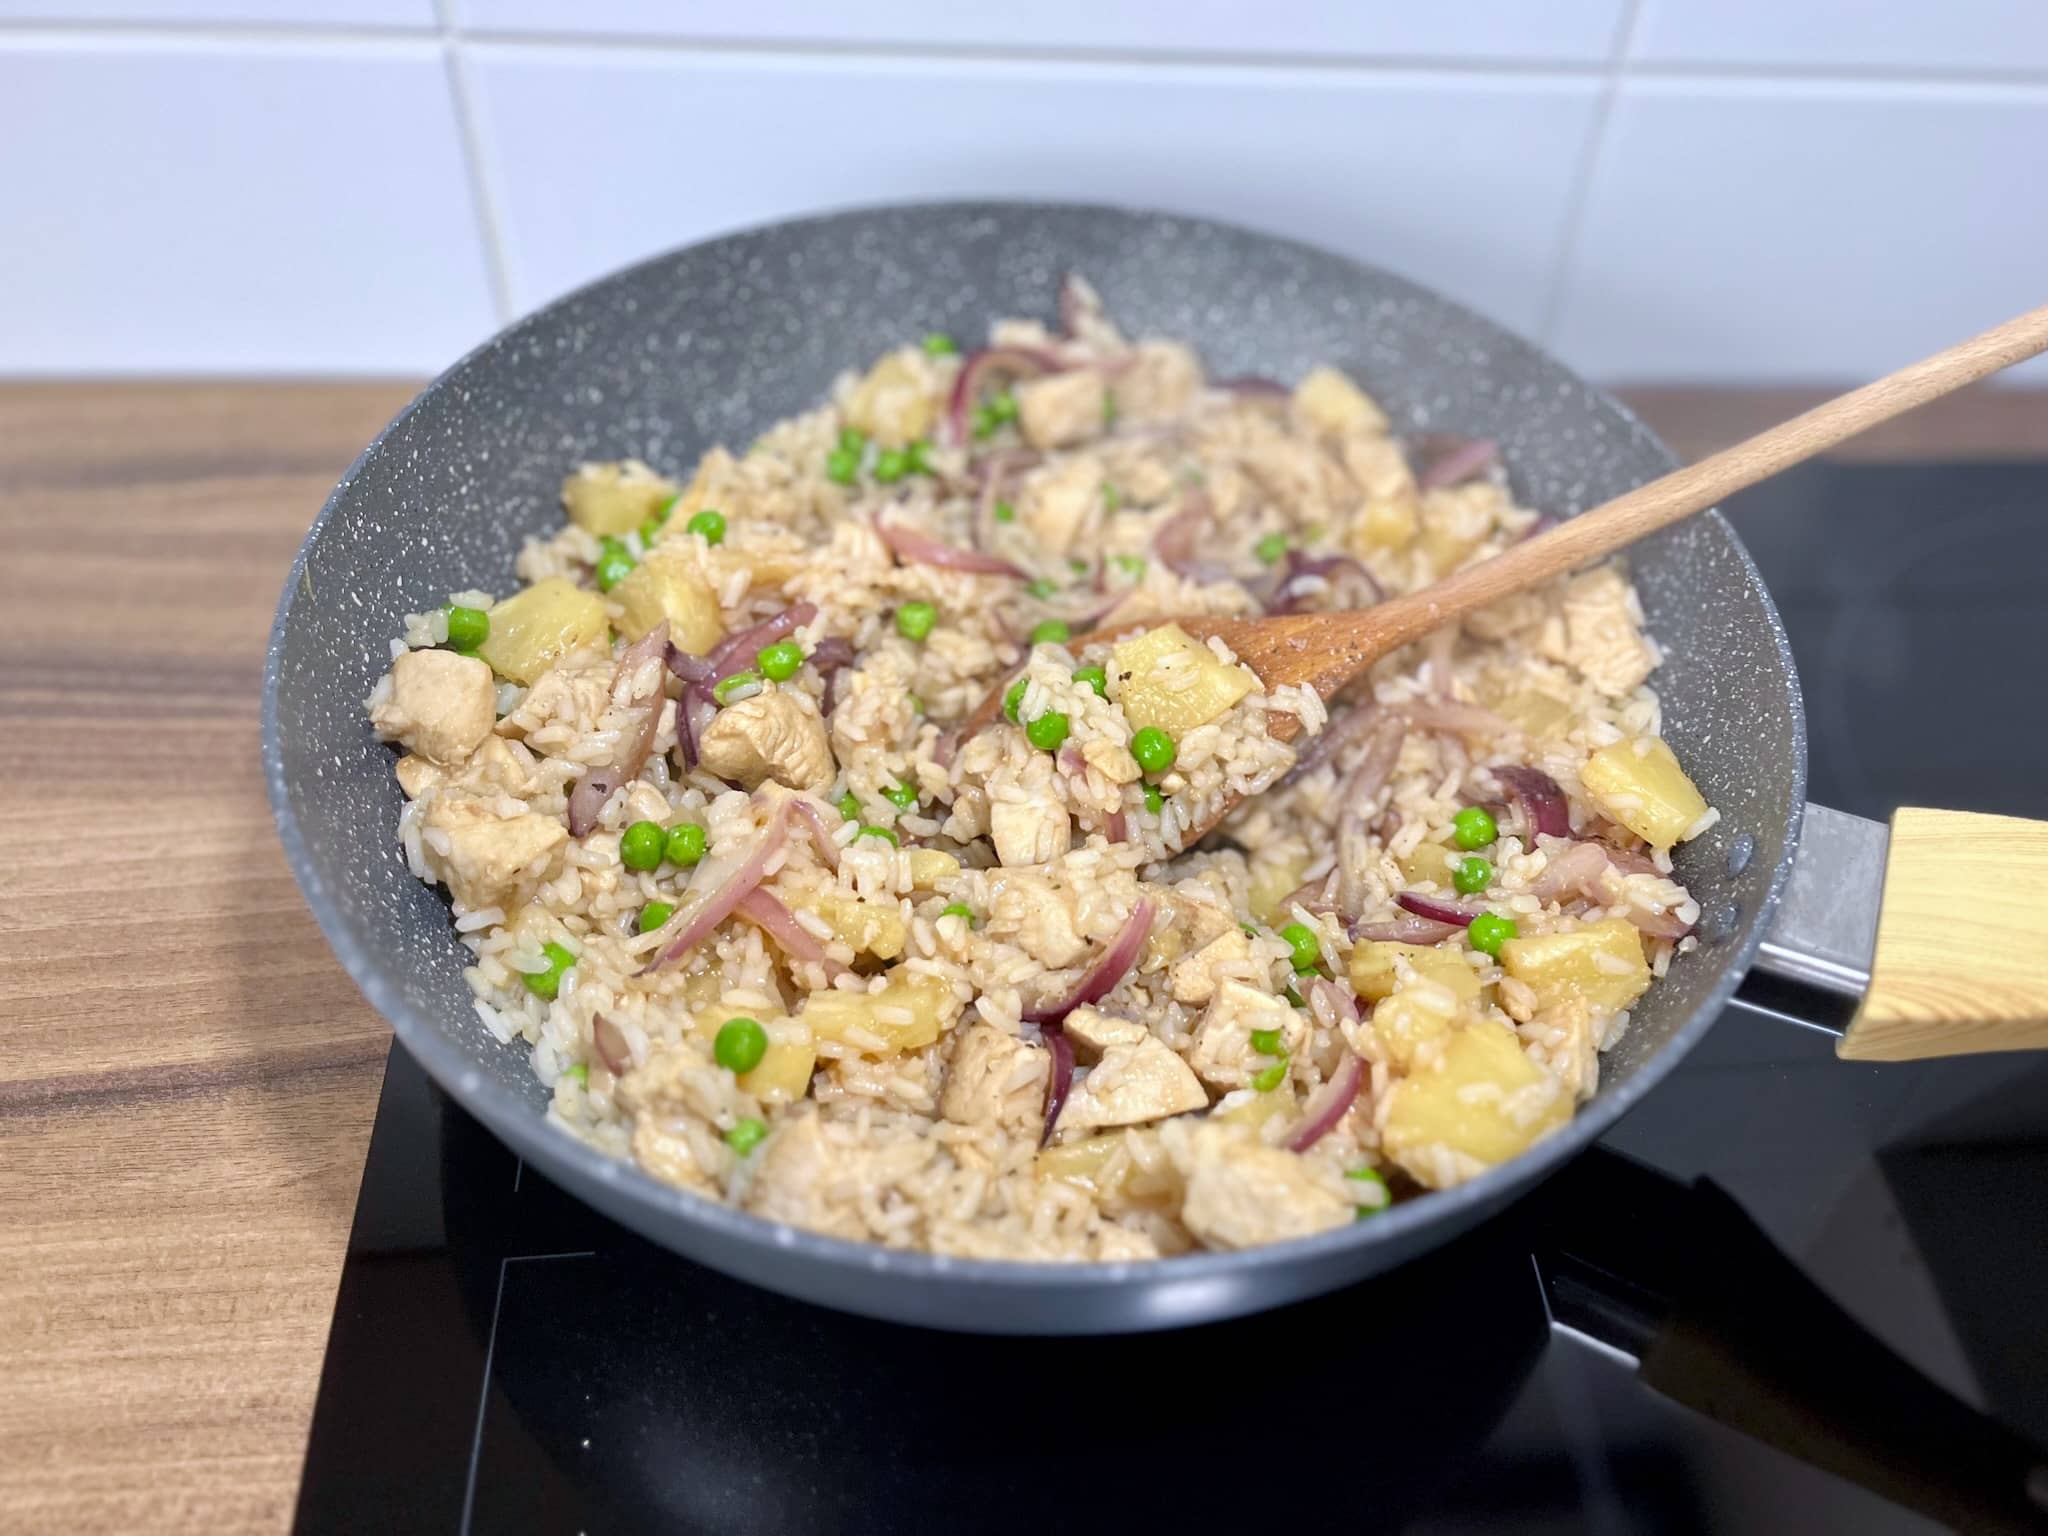 A nicely done pan of chicken and pineapple fried rice